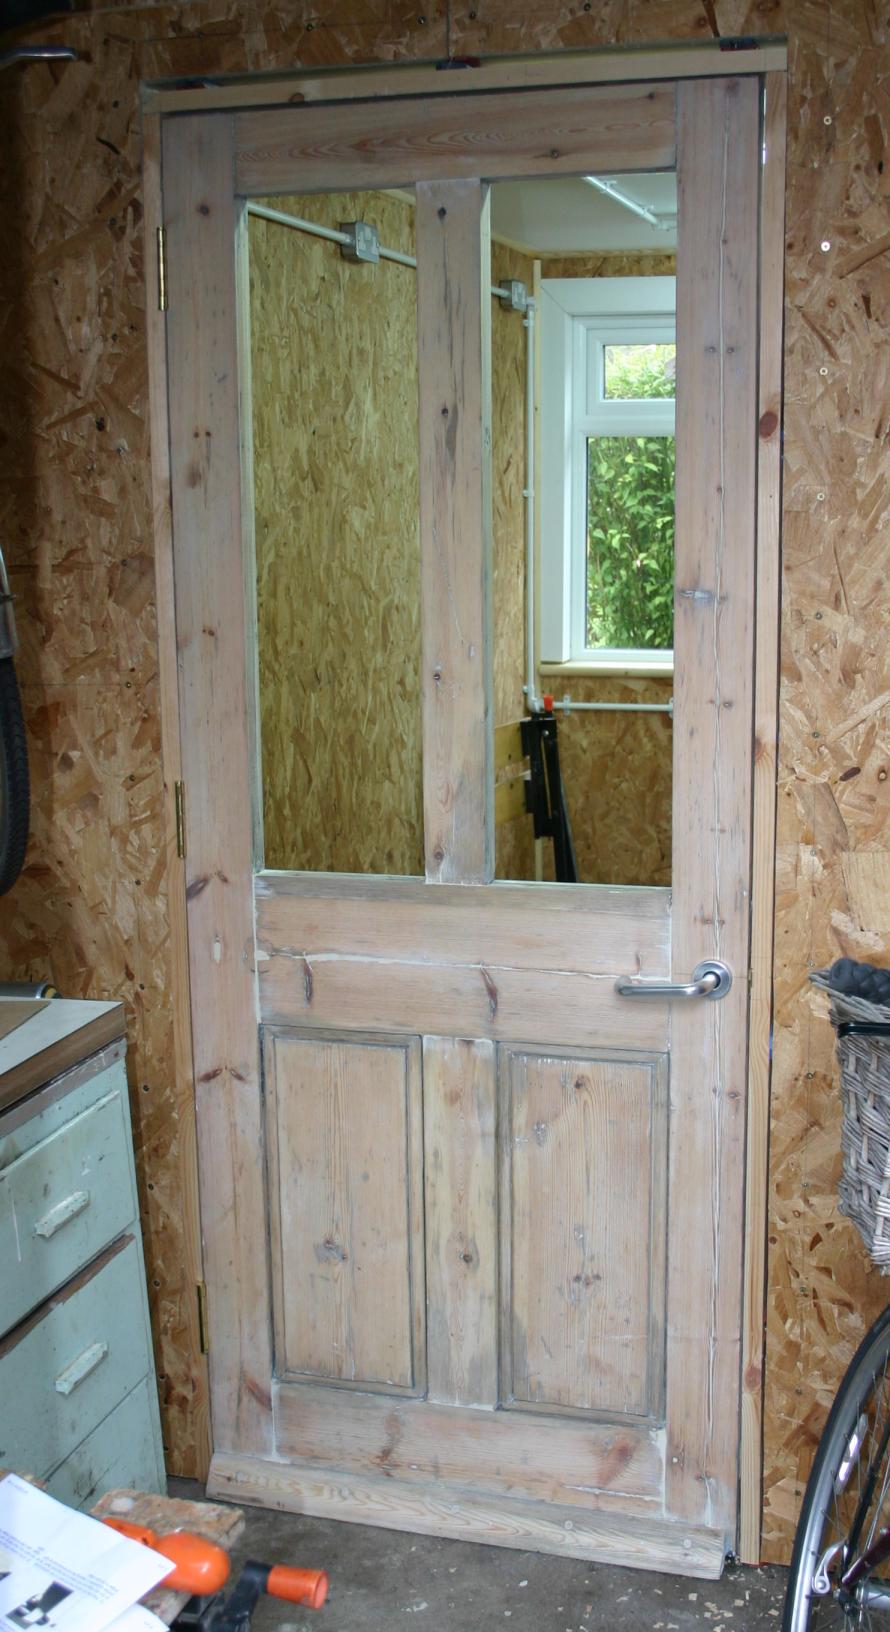 The door fitted in place.